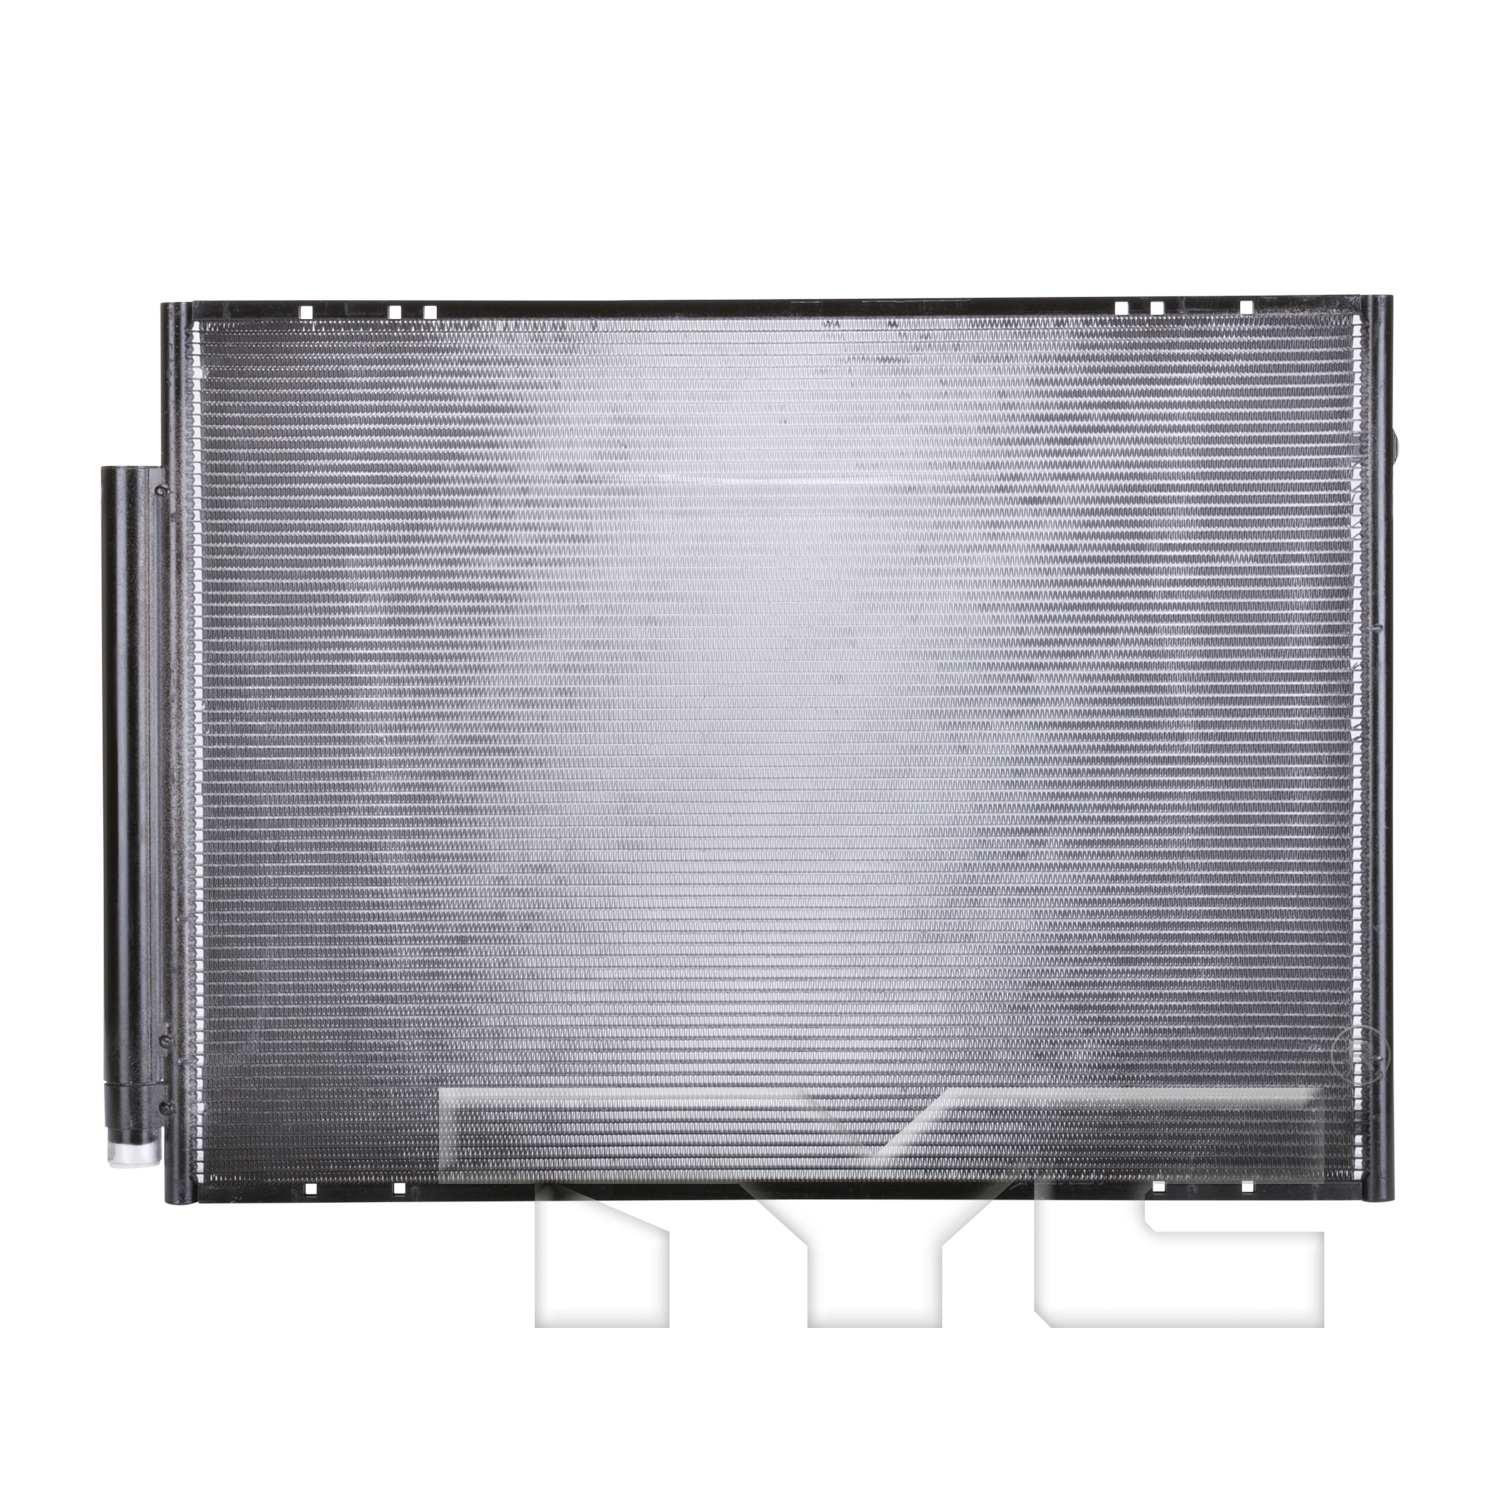 Aftermarket AC CONDENSERS for LEXUS - RX330, RX330,06-06,Air conditioning condenser